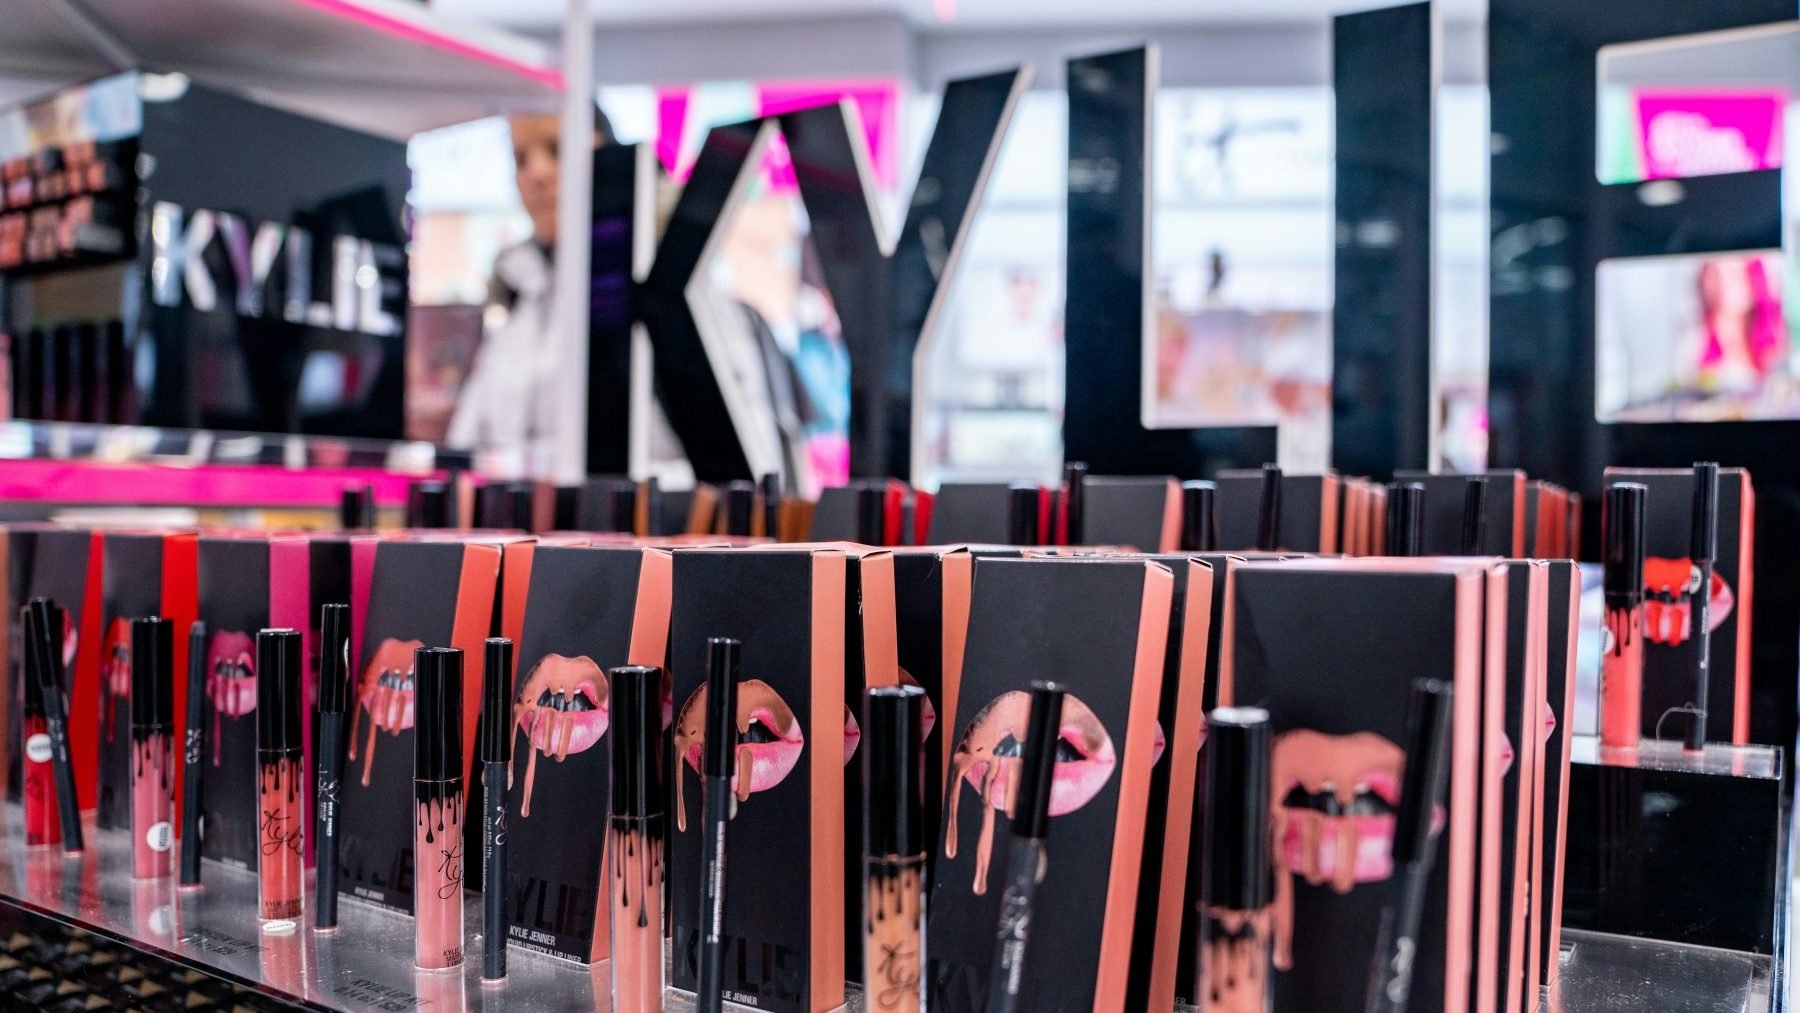 Coty acquired a majority stake in Kylie Cosmetics in late 2019. Getty Images